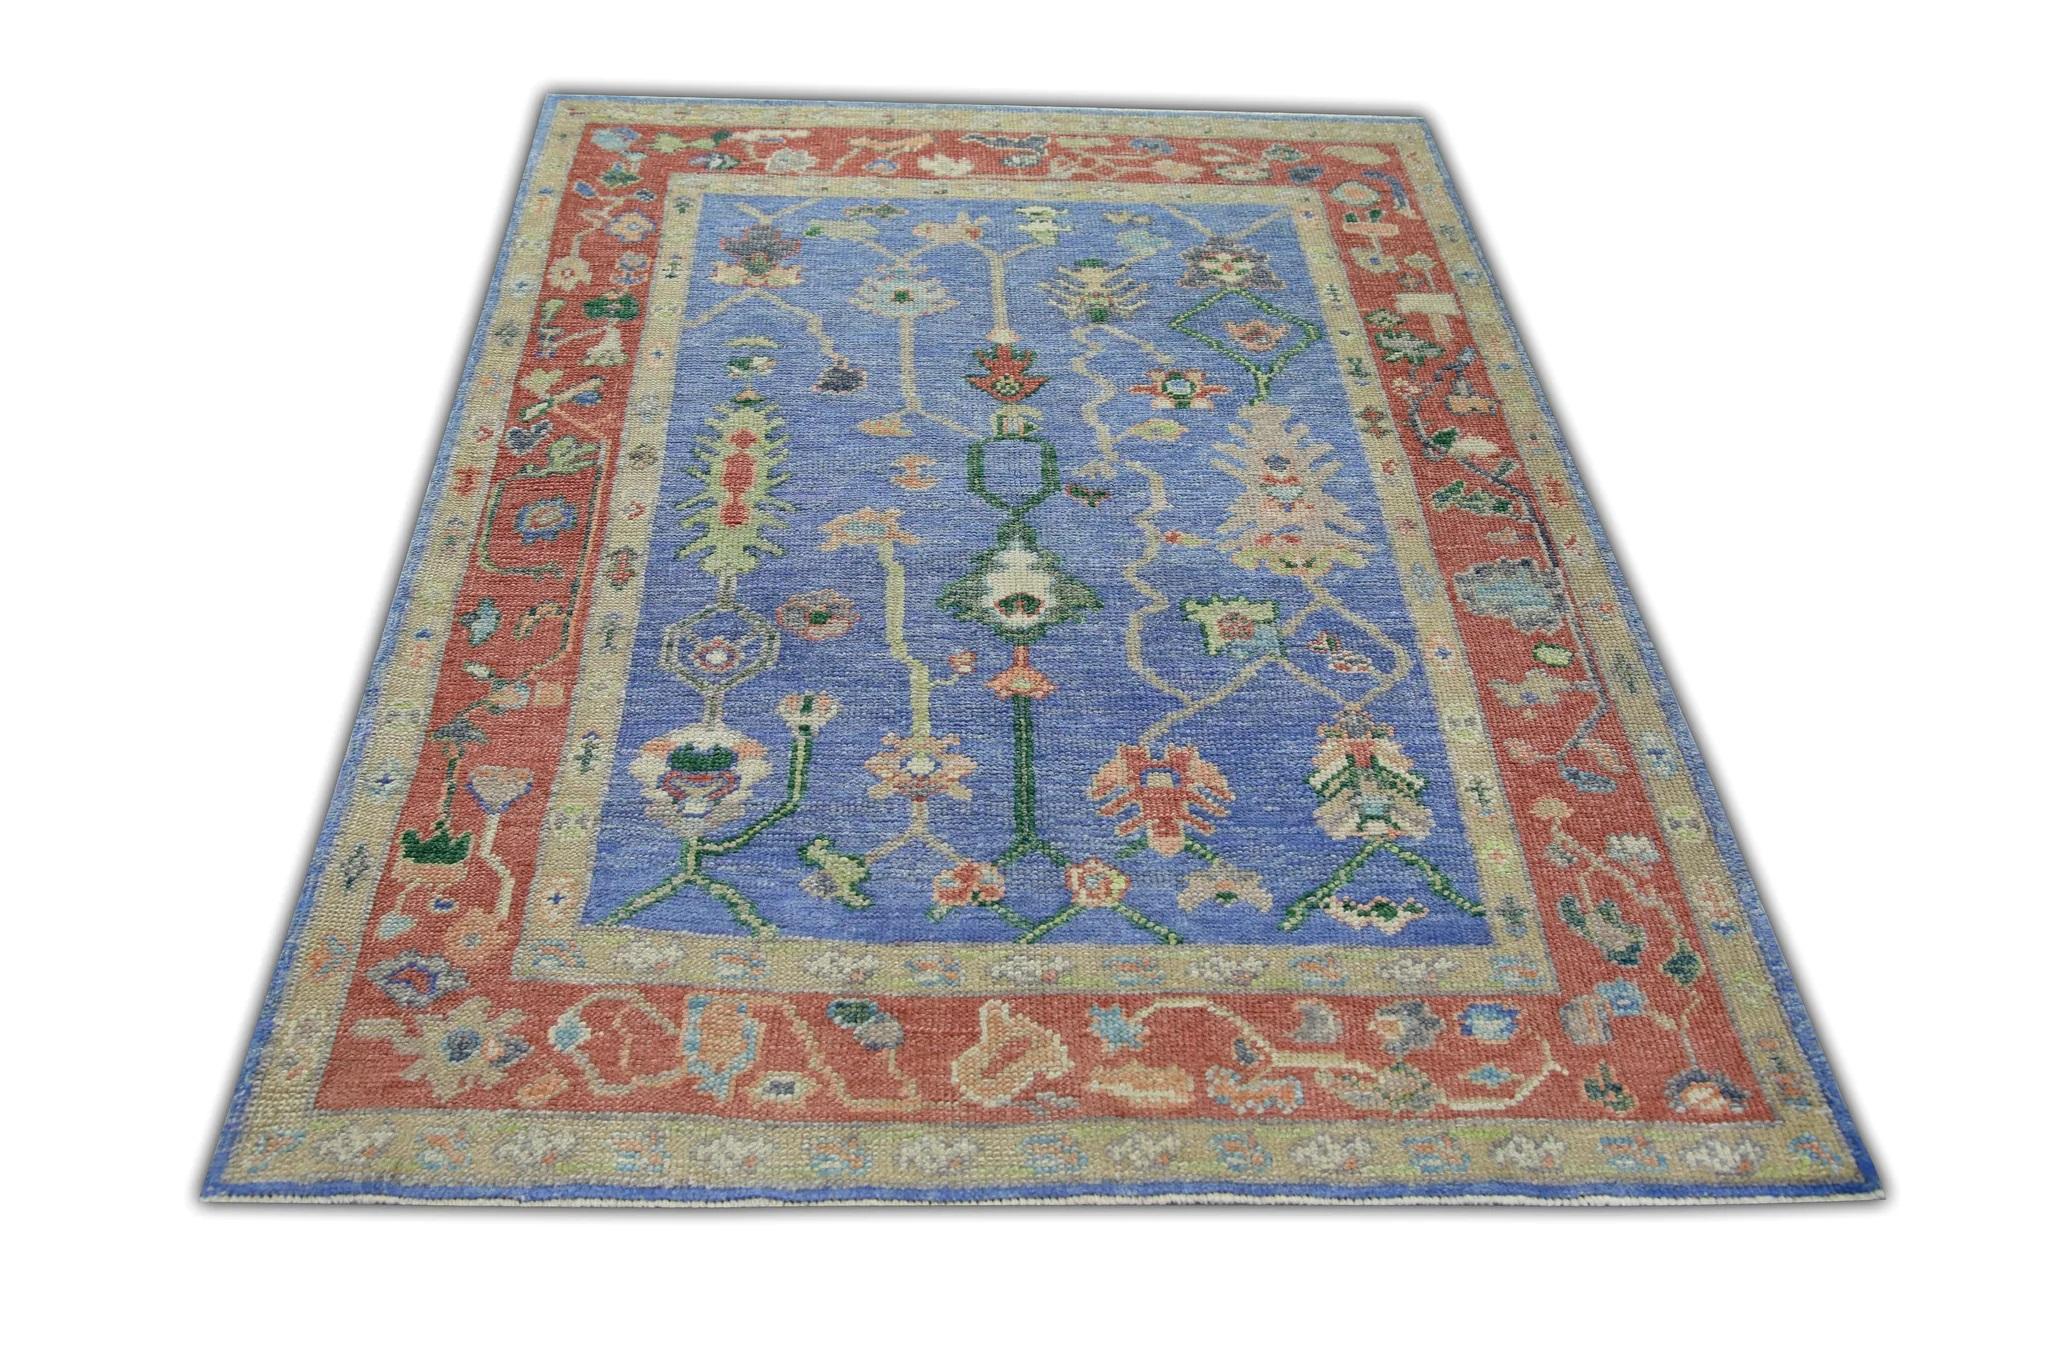 Contemporary Blue & Red Floral Pattern Handwoven Wool Turkish Oushak Rug 4'2